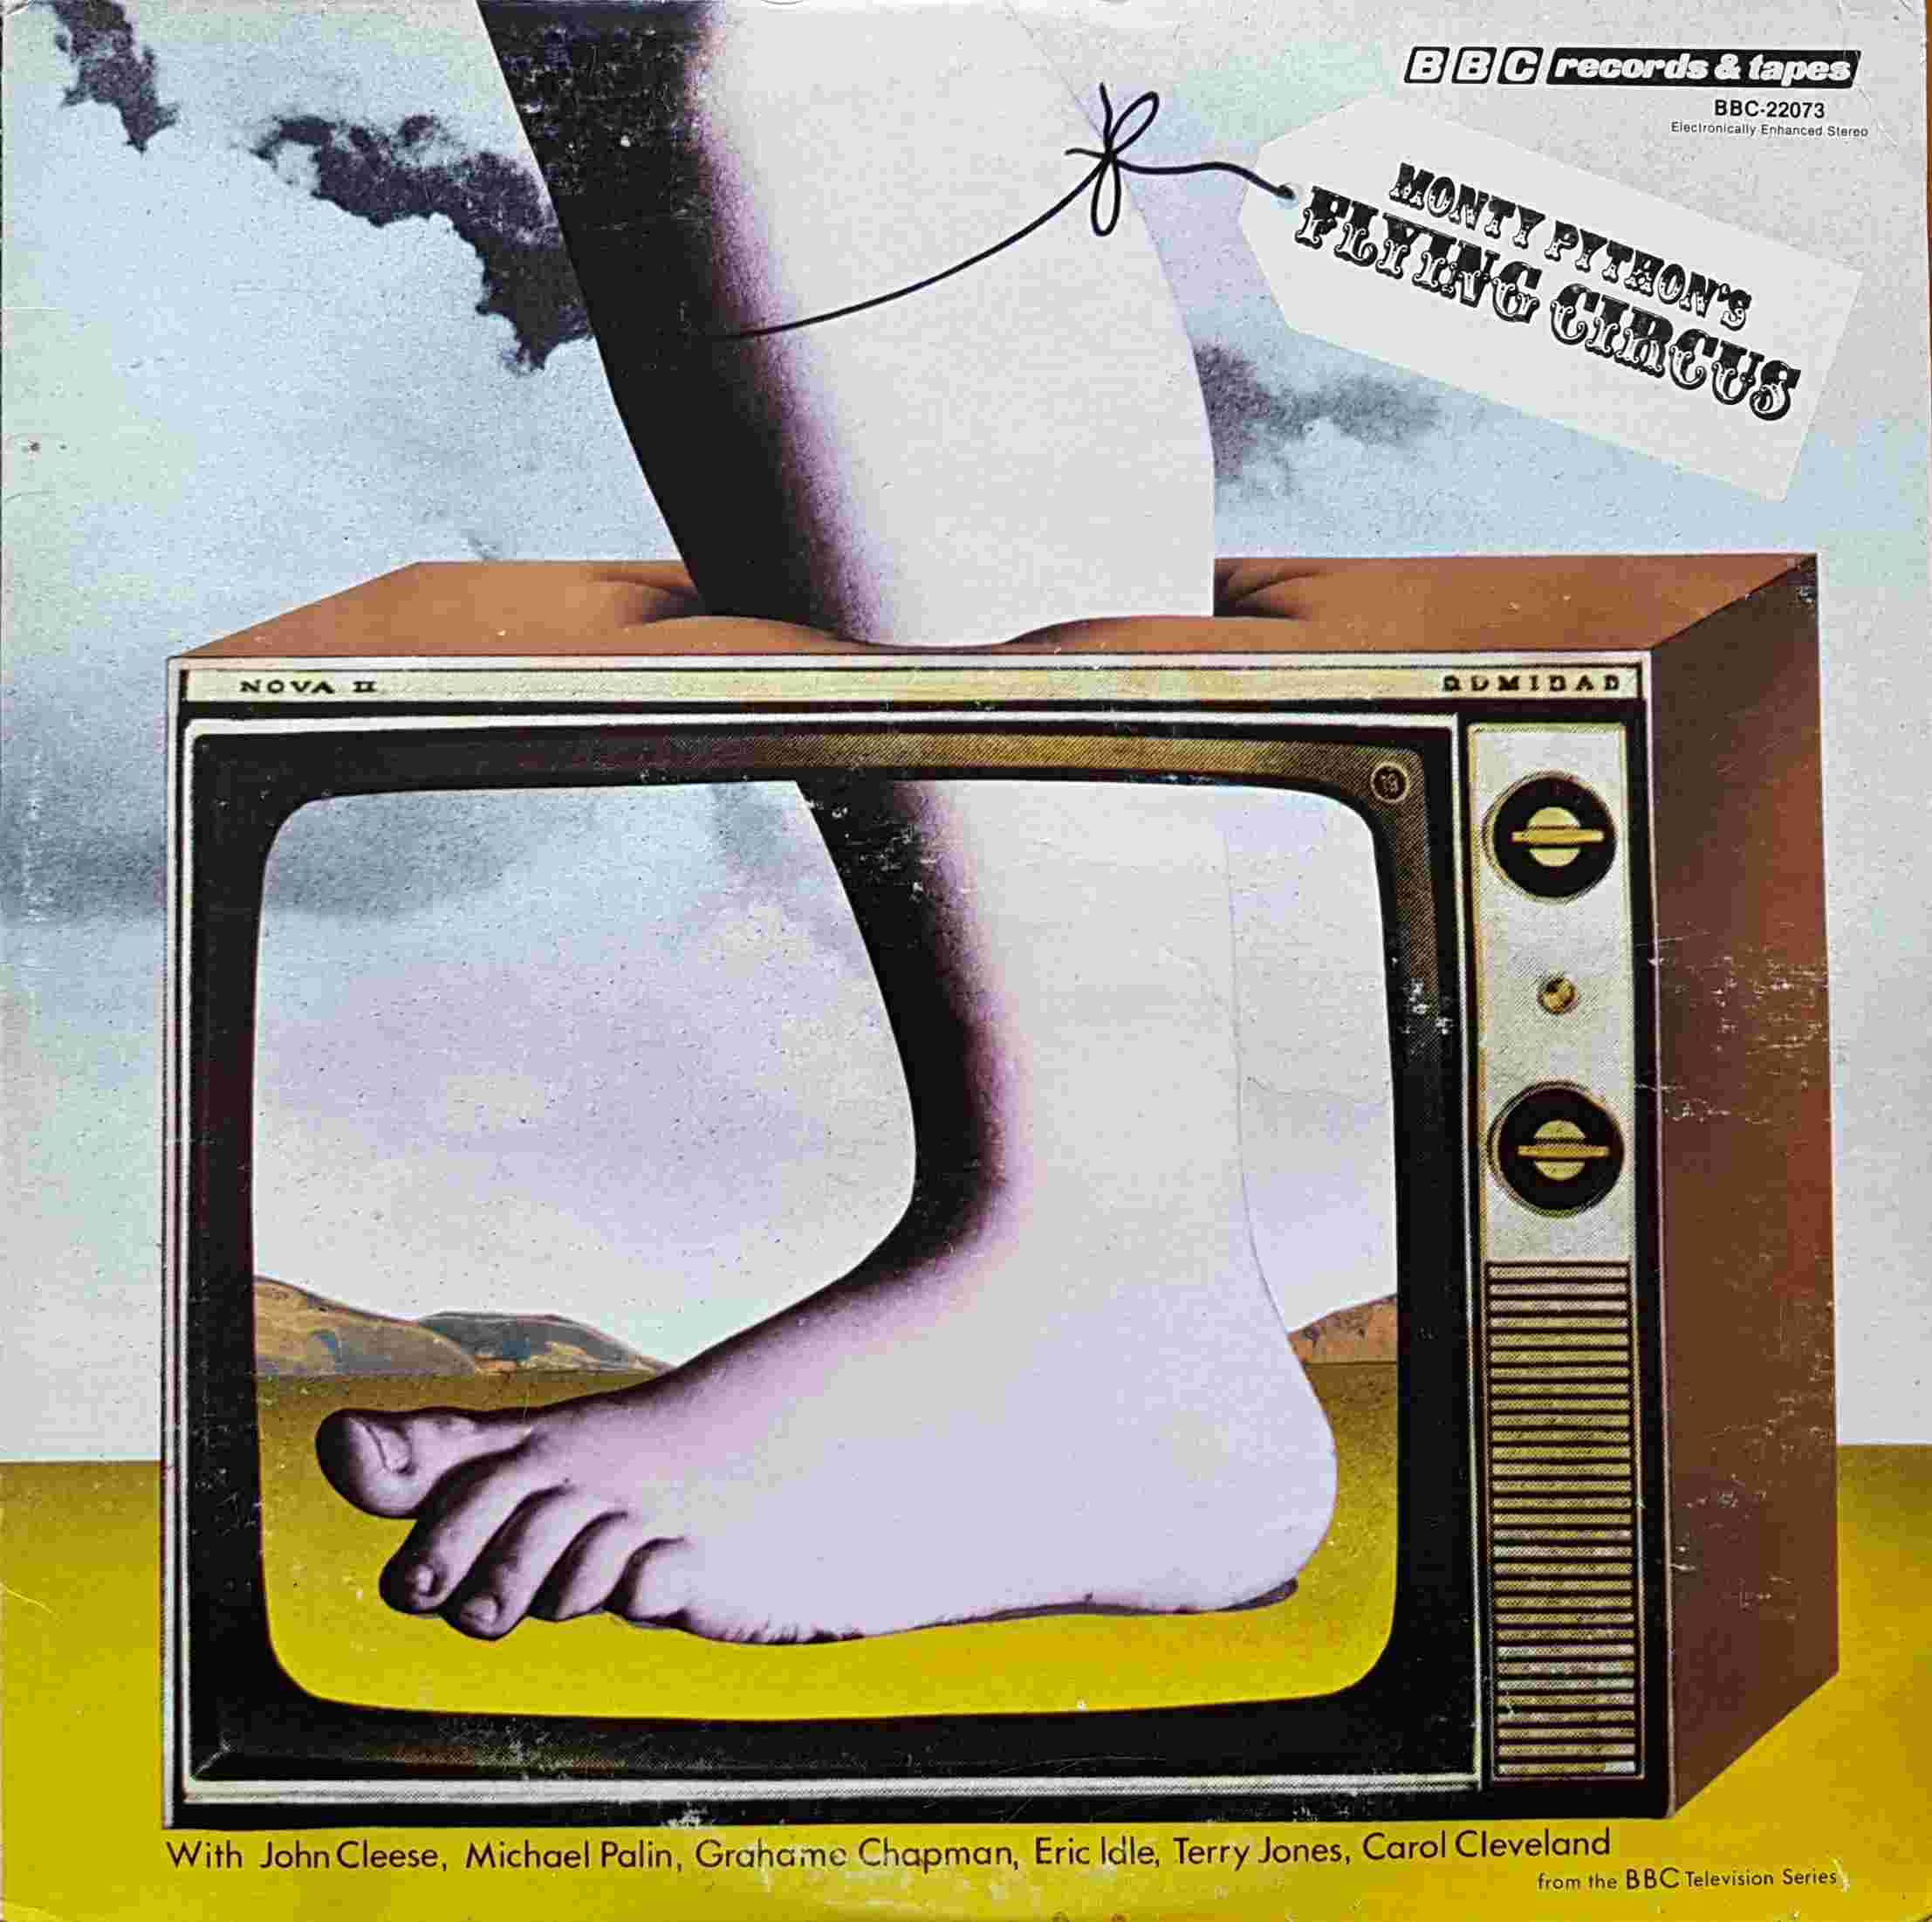 Picture of Monty Python's flying circus by artist Monty Python from the BBC albums - Records and Tapes library